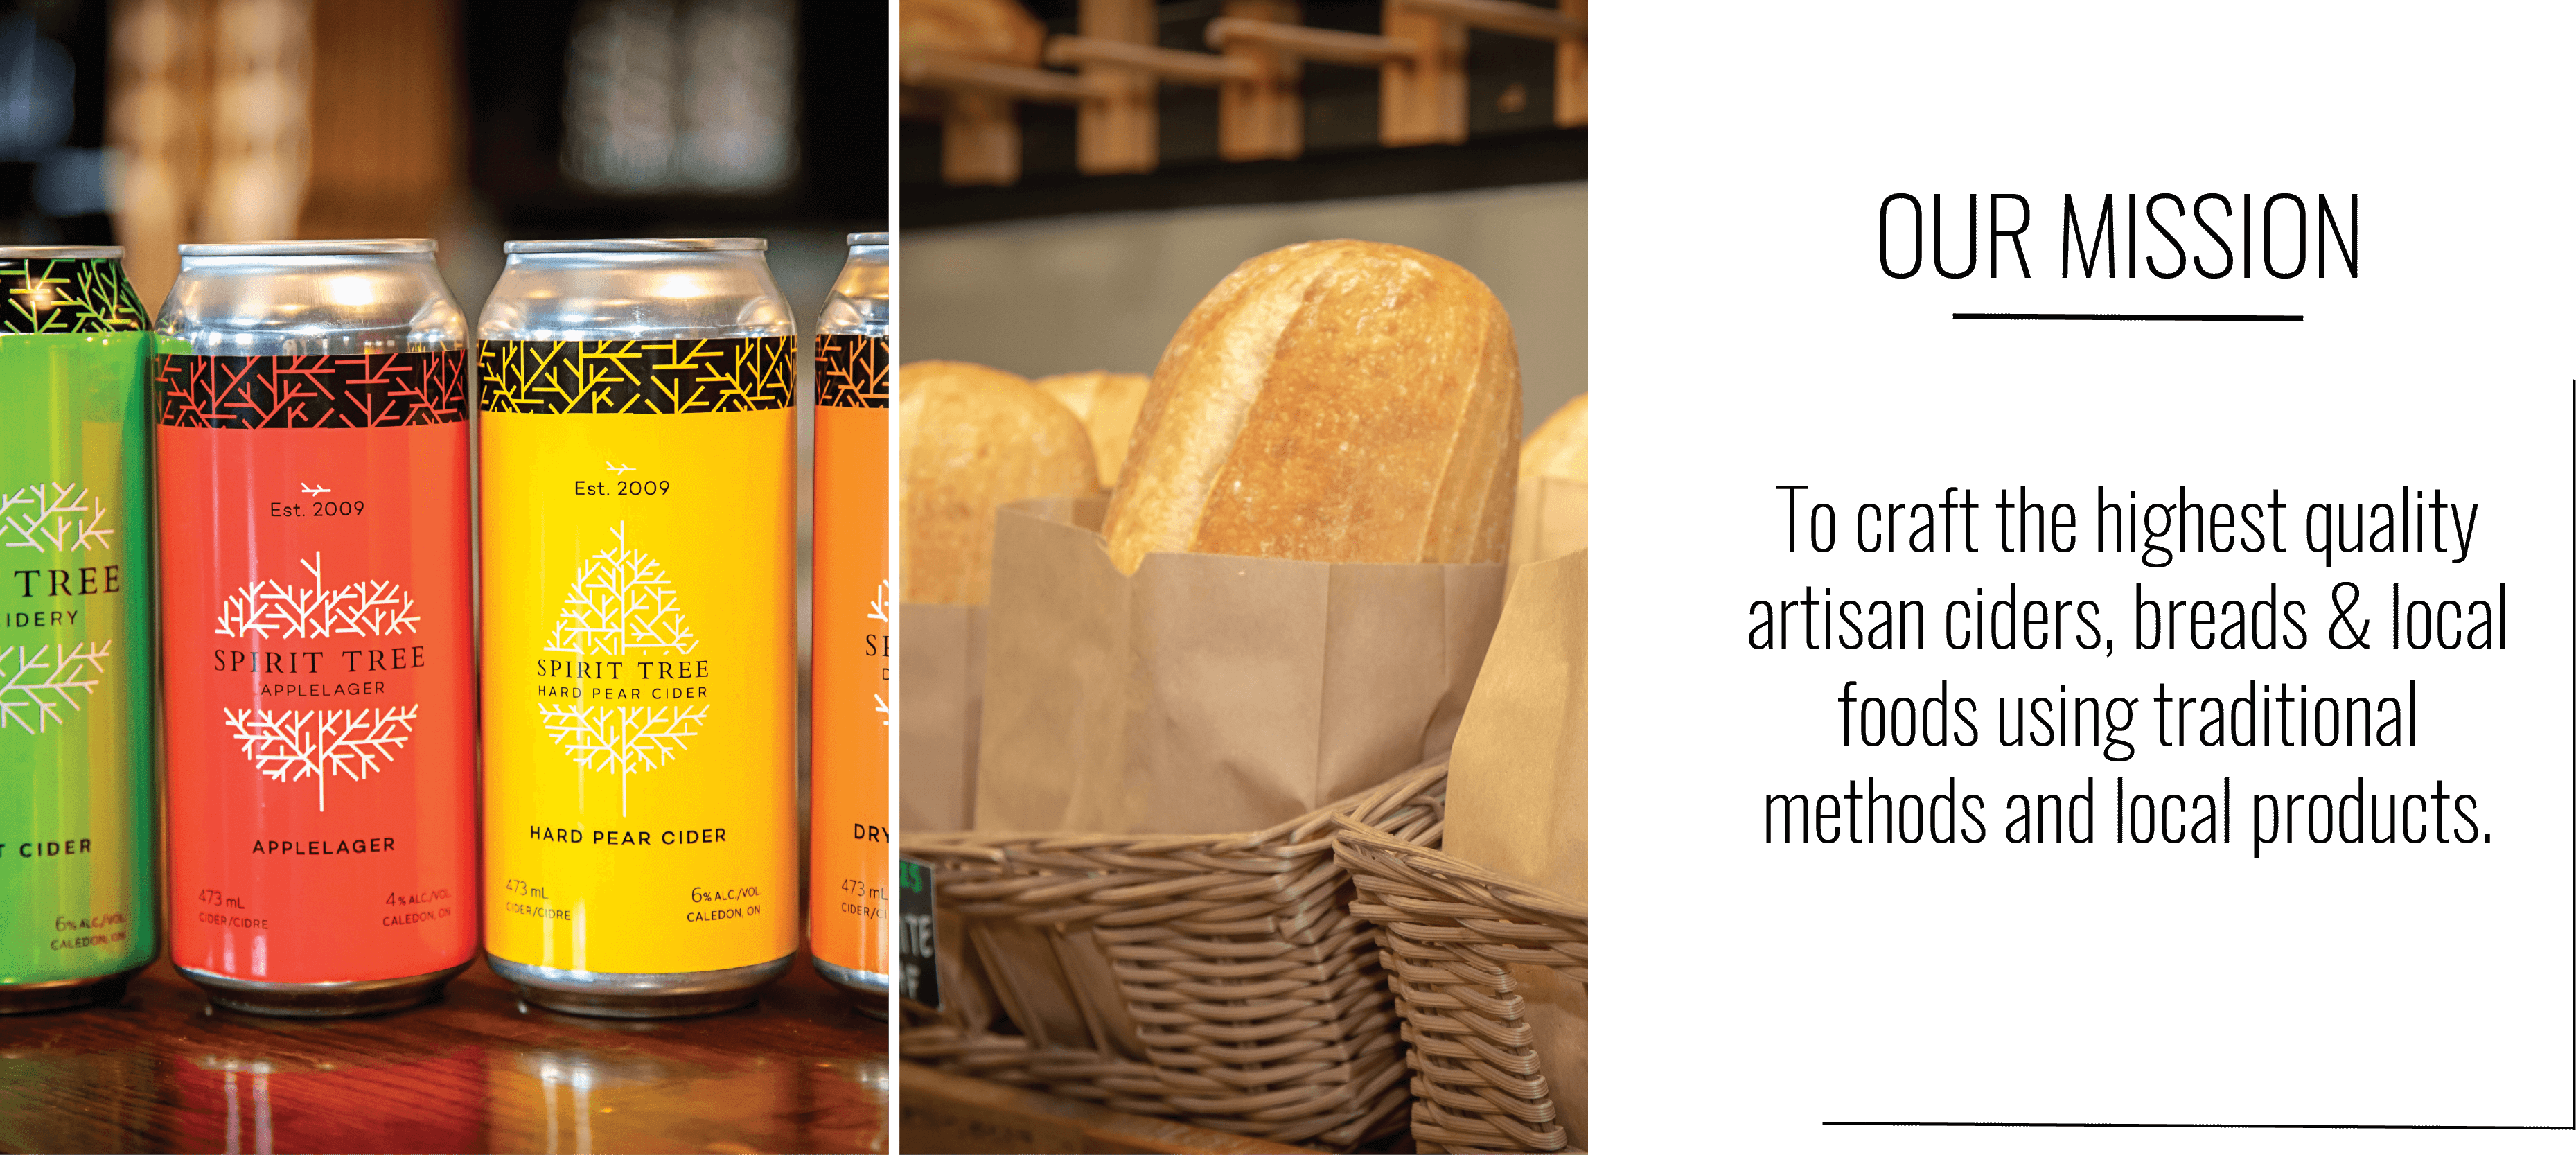 To craft the highest quality artisan ciders, breads & local foods using traditional methods and local products.